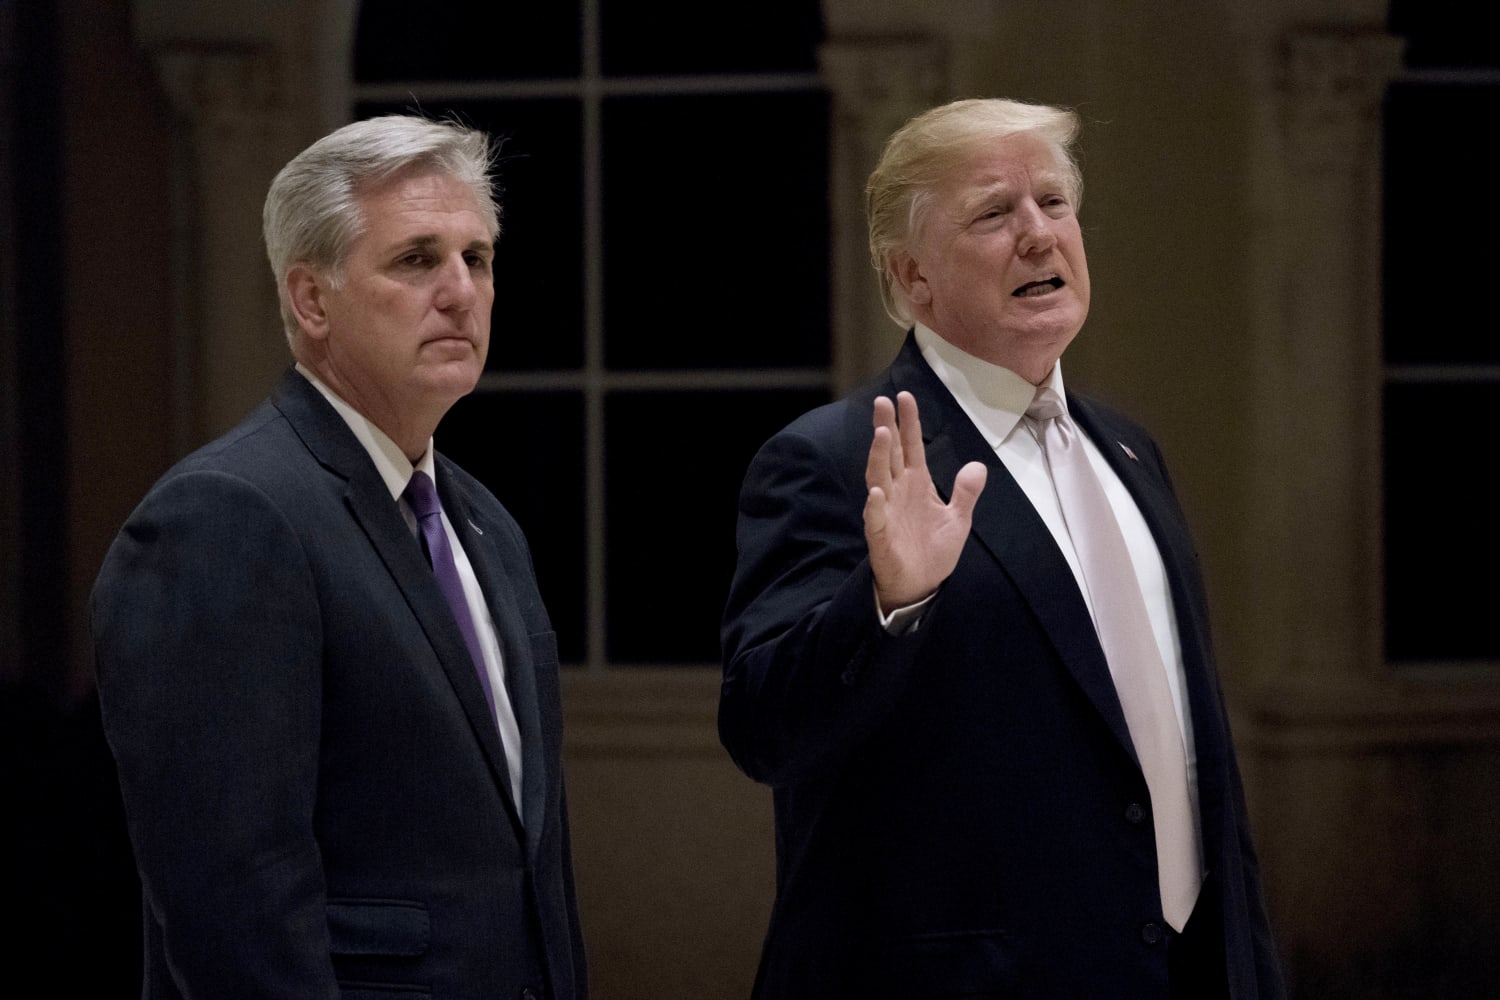 Trump mum on whether he still supports McCarthy for speaker: 'We'll see what happens'